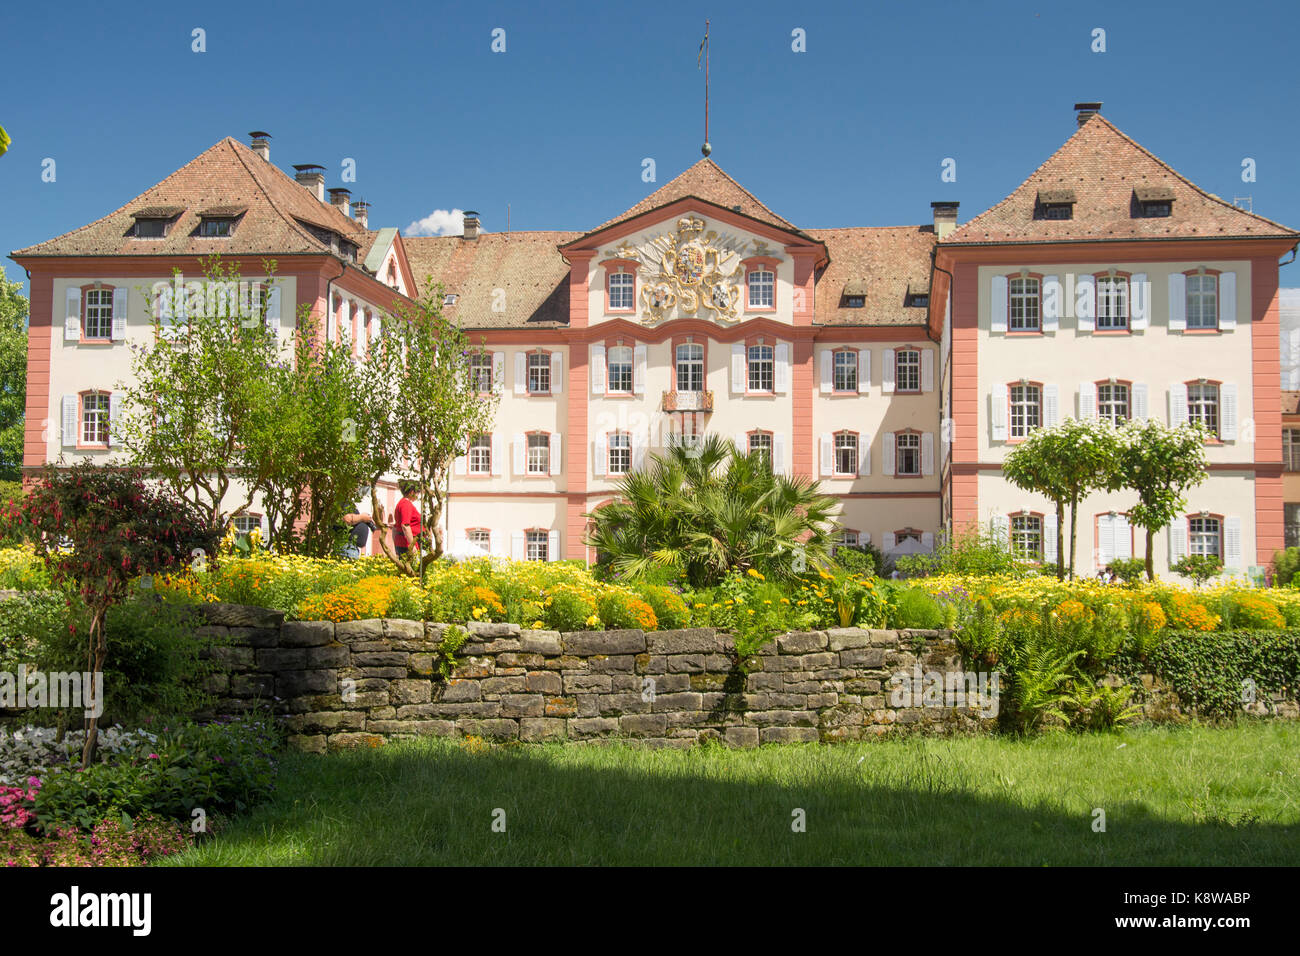 Schloss Mainau within its garden estate on Mainau Island, Lake Constance (Bodensee), southern Germany Stock Photo